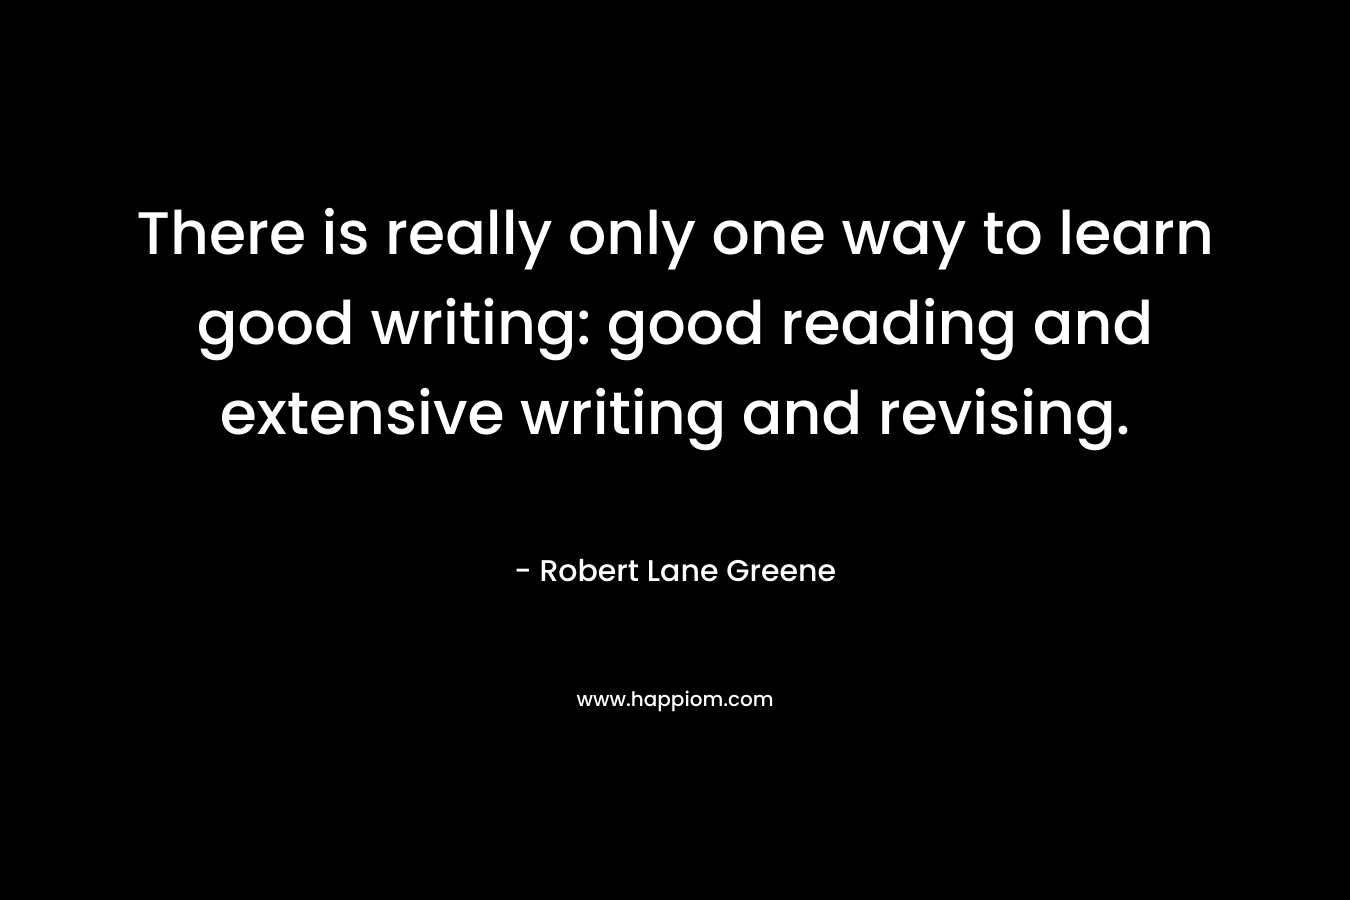 There is really only one way to learn good writing: good reading and extensive writing and revising.